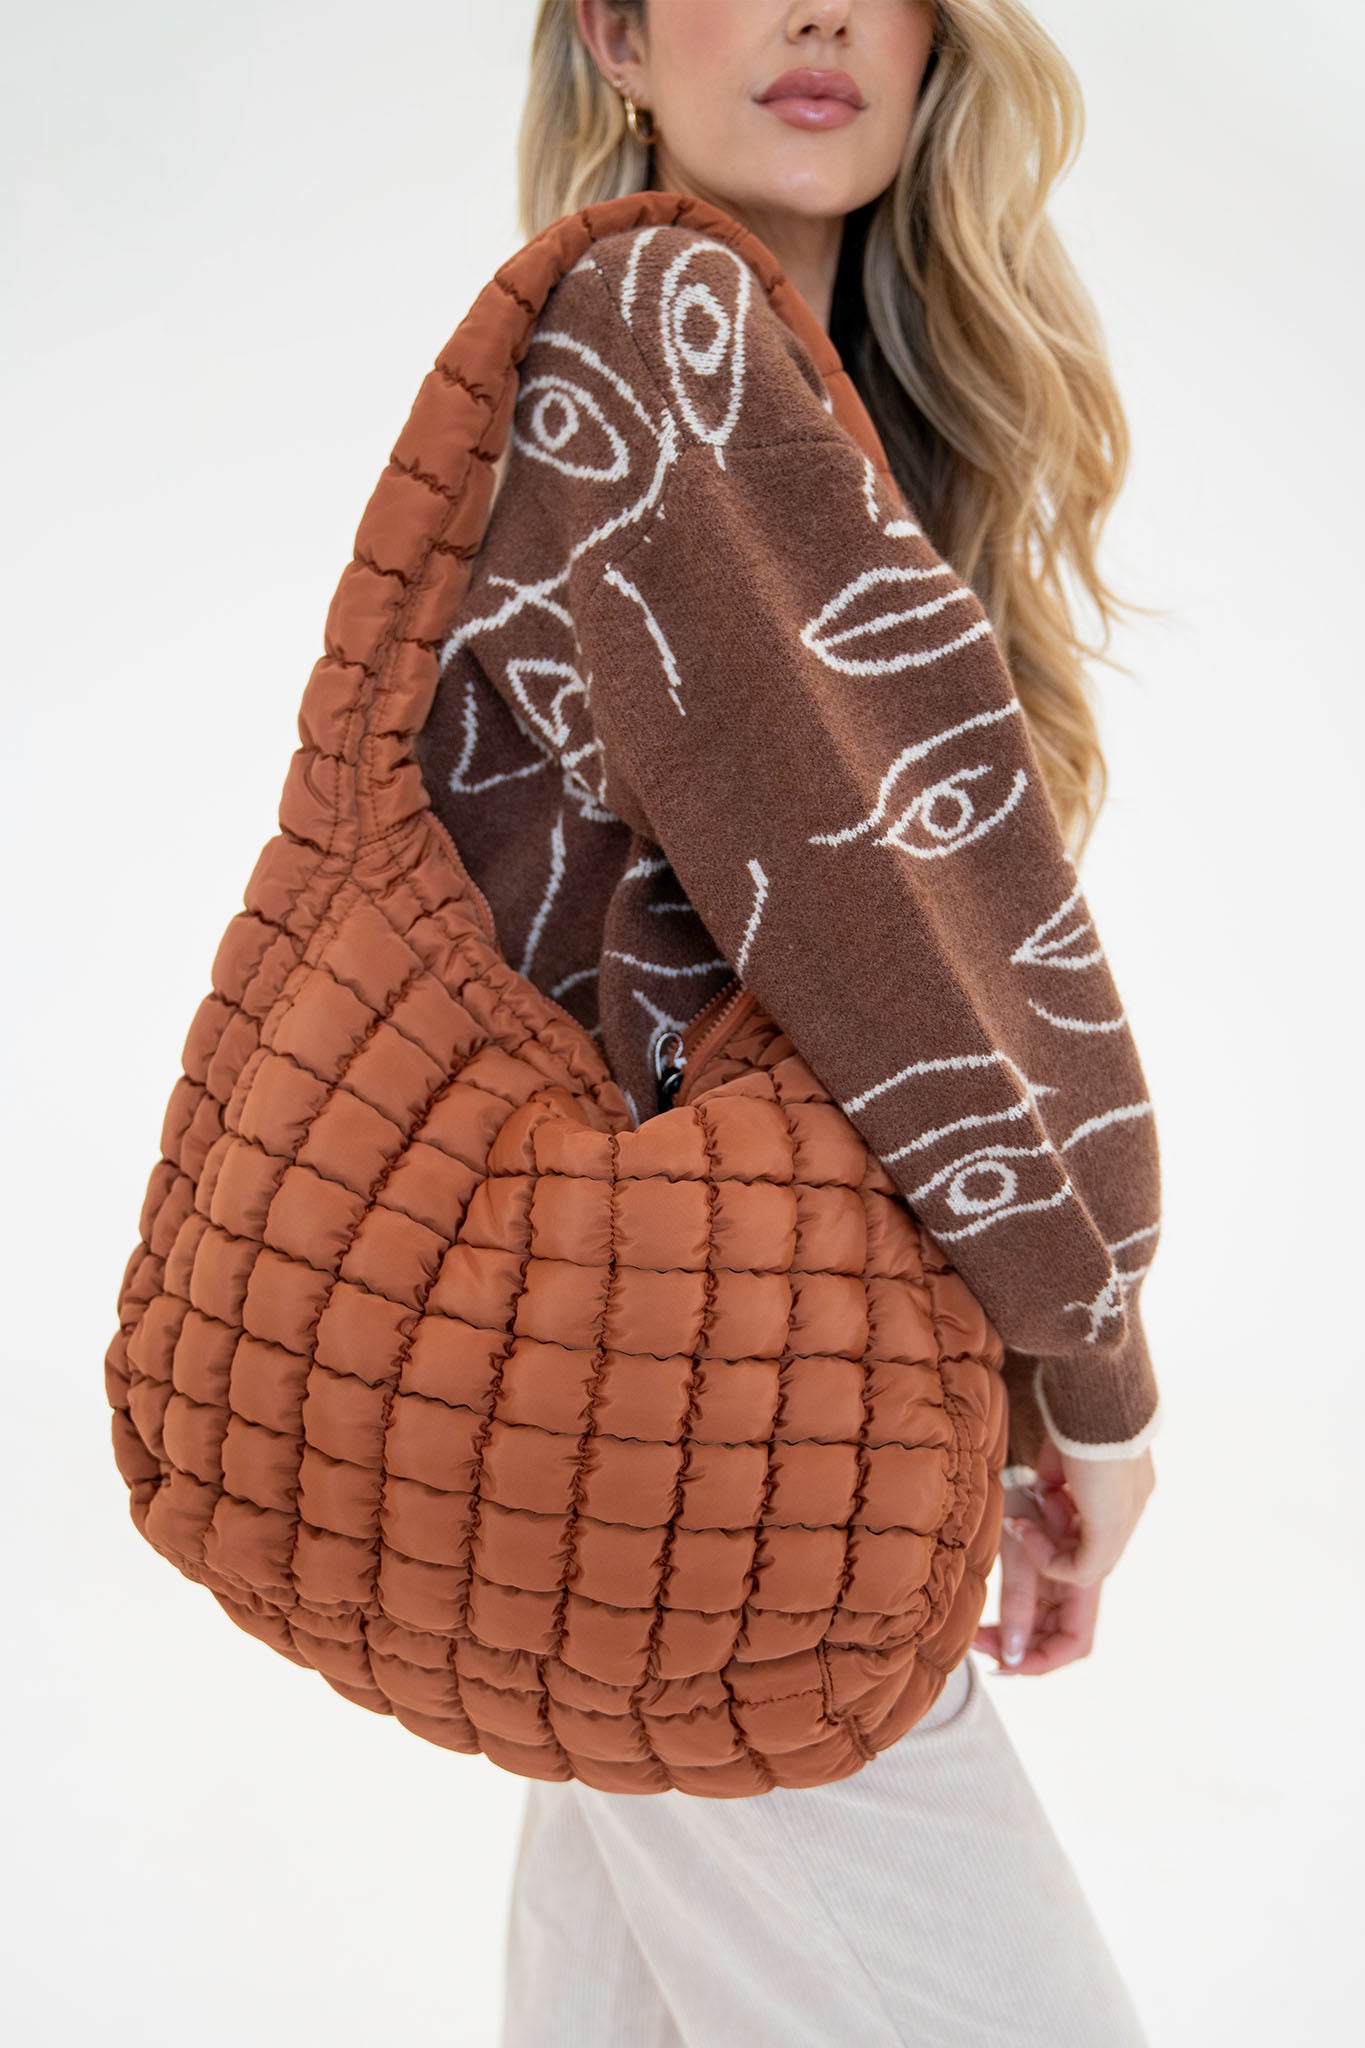 Cleo Quilted Hobo Bag in Caramel